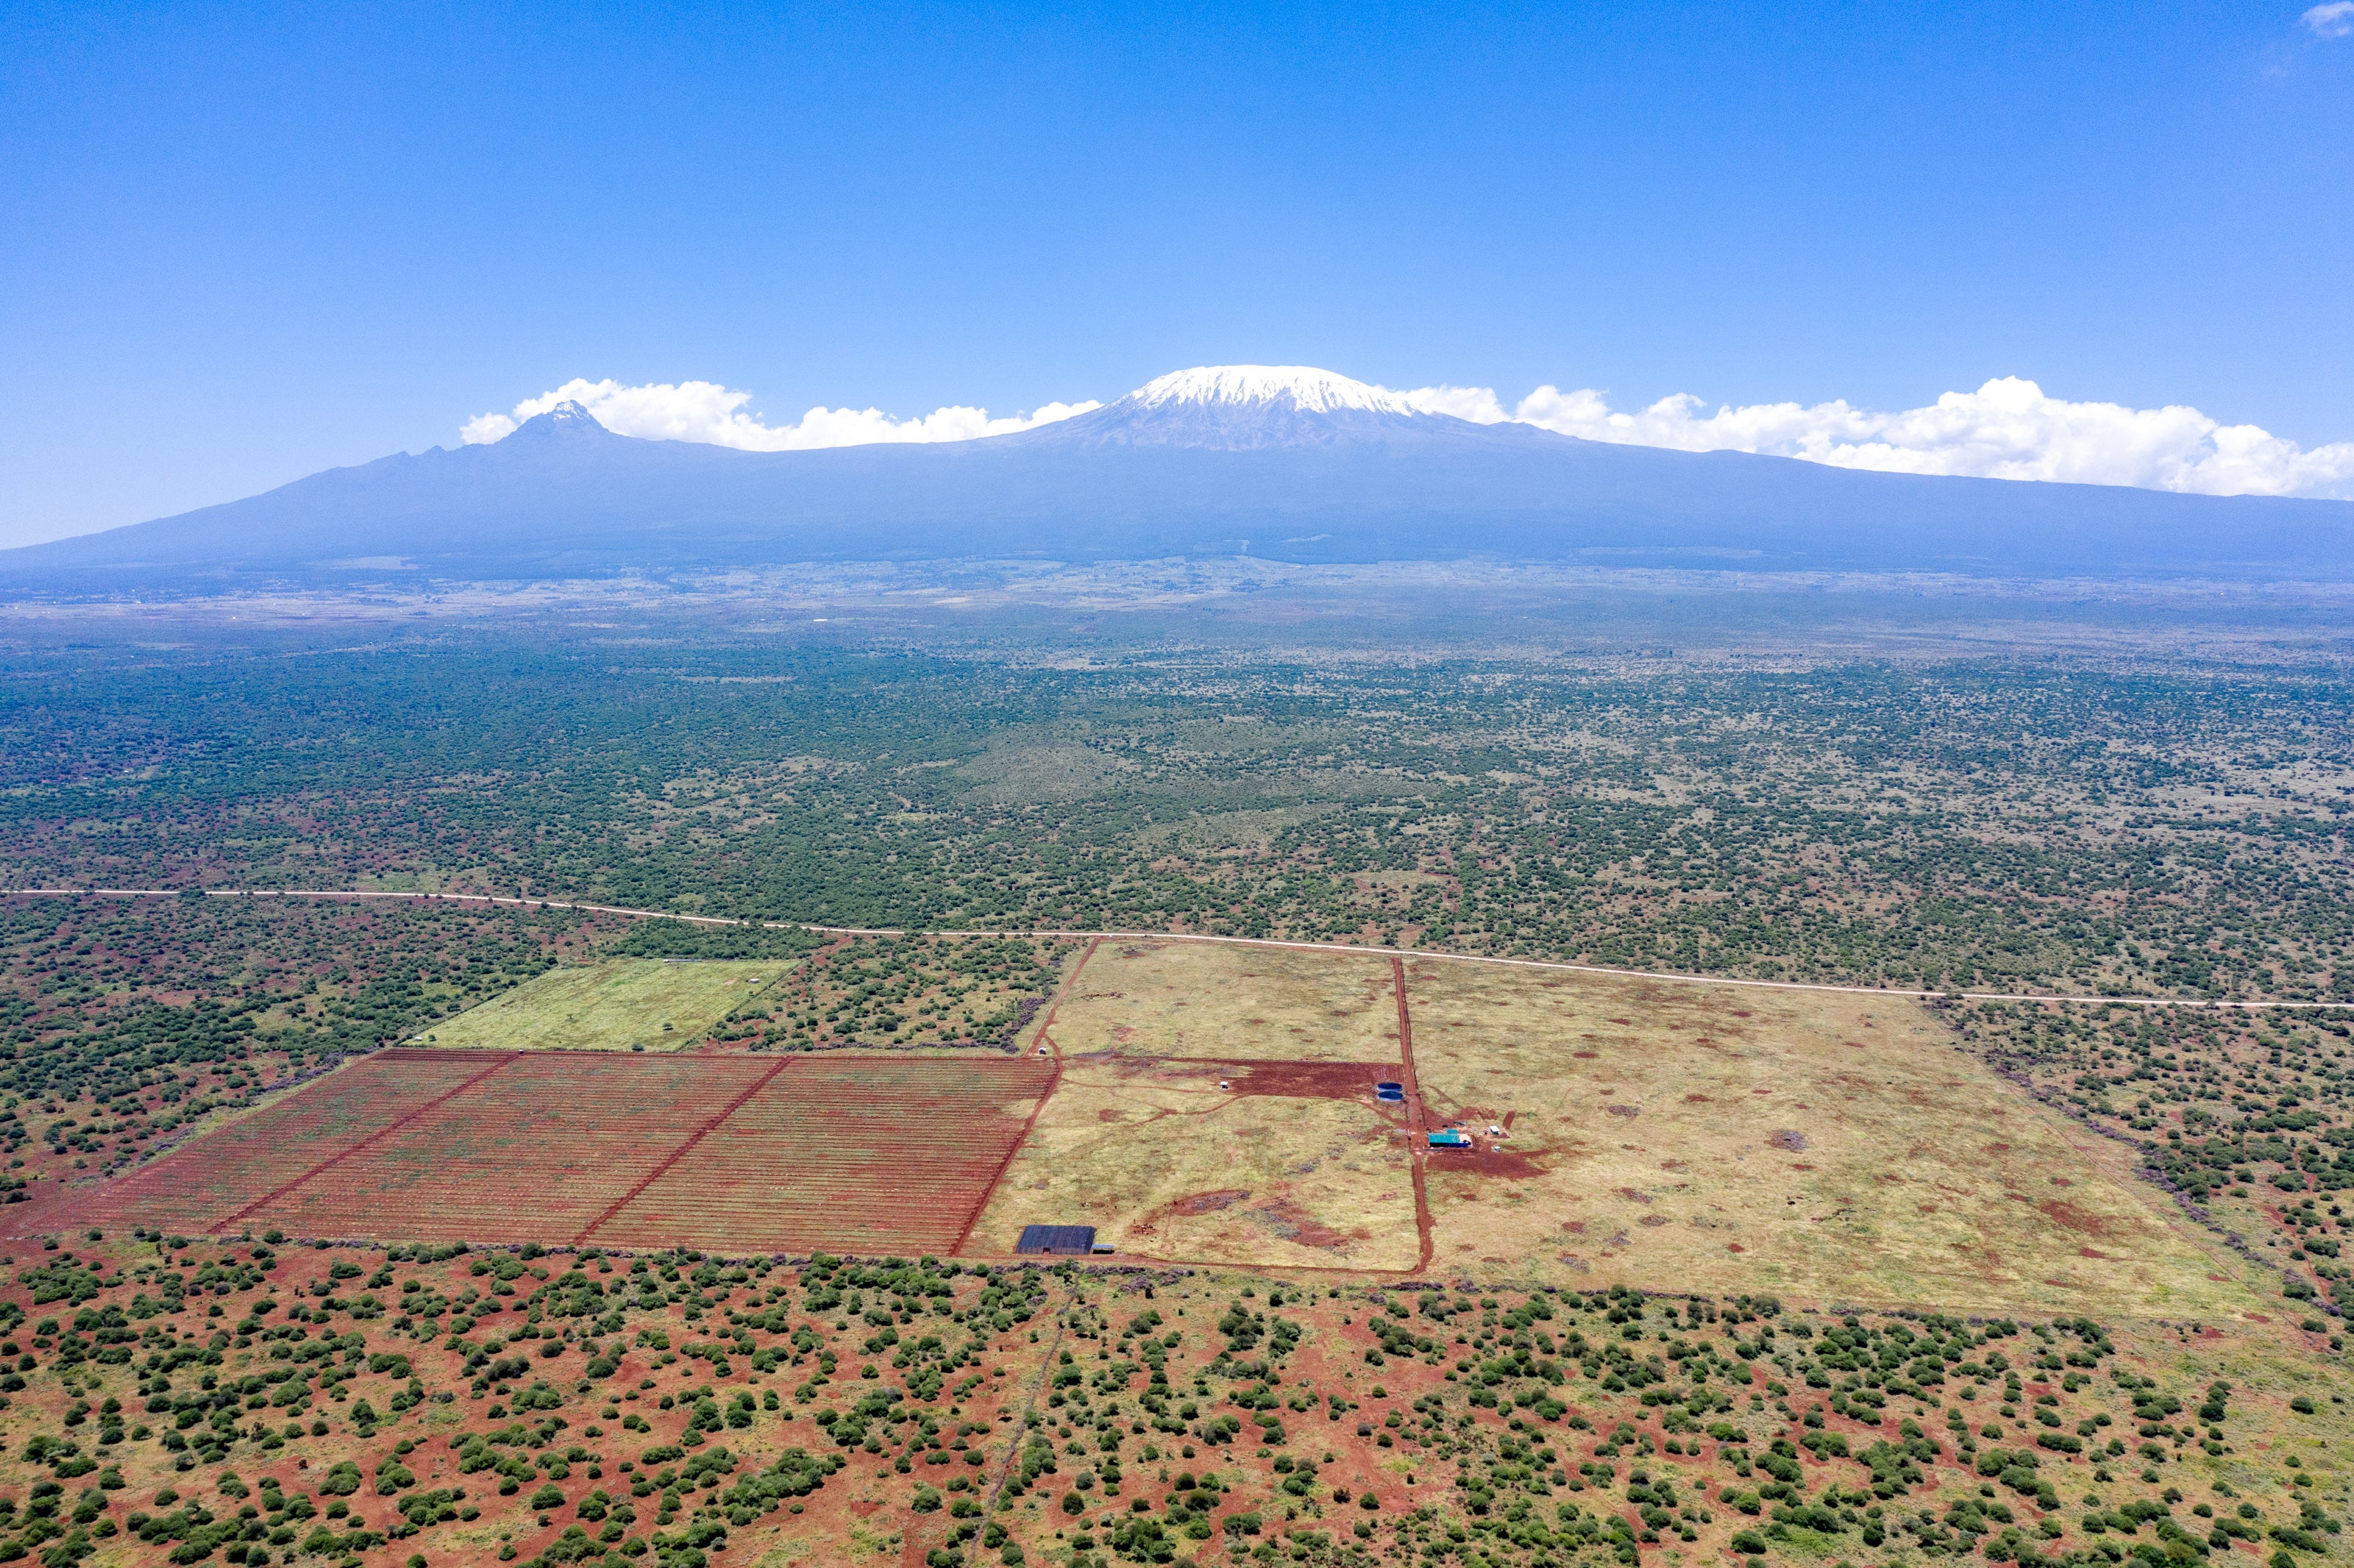 KiliAvo’s farm lies in the middle of an elephant migration path and key Masai grazing area